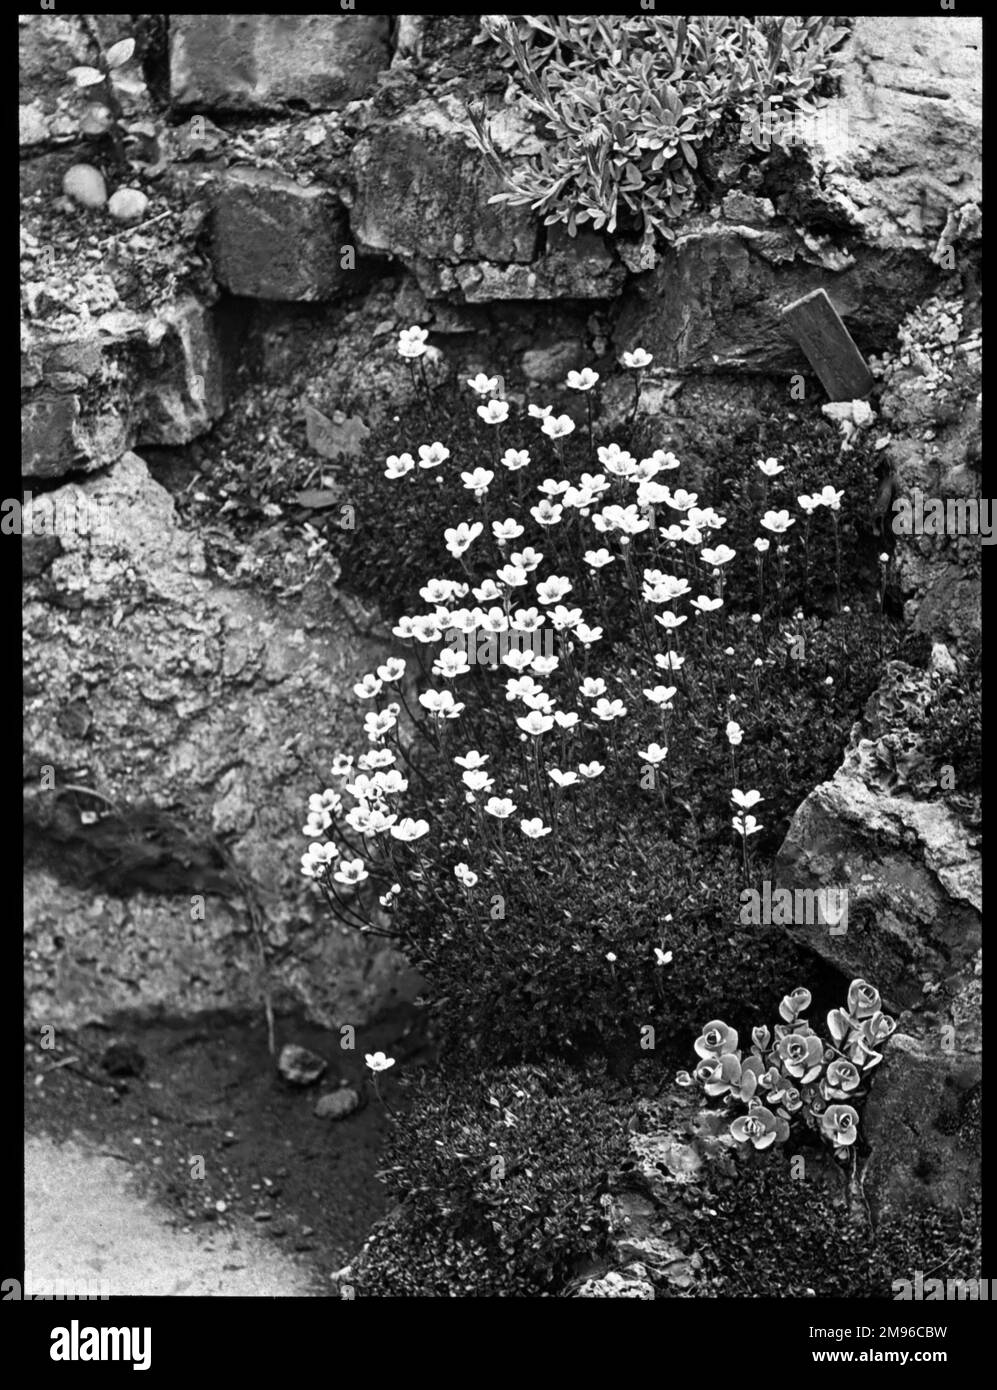 Saxifraga Cespitosa  (Tufted Saxifrage), a flowering plant of the Saxifragaceae family (commonly known as saxifrages or stone breakers because of their ability to grow in the cracks between rocks). Seen here in a rocky setting. Stock Photo